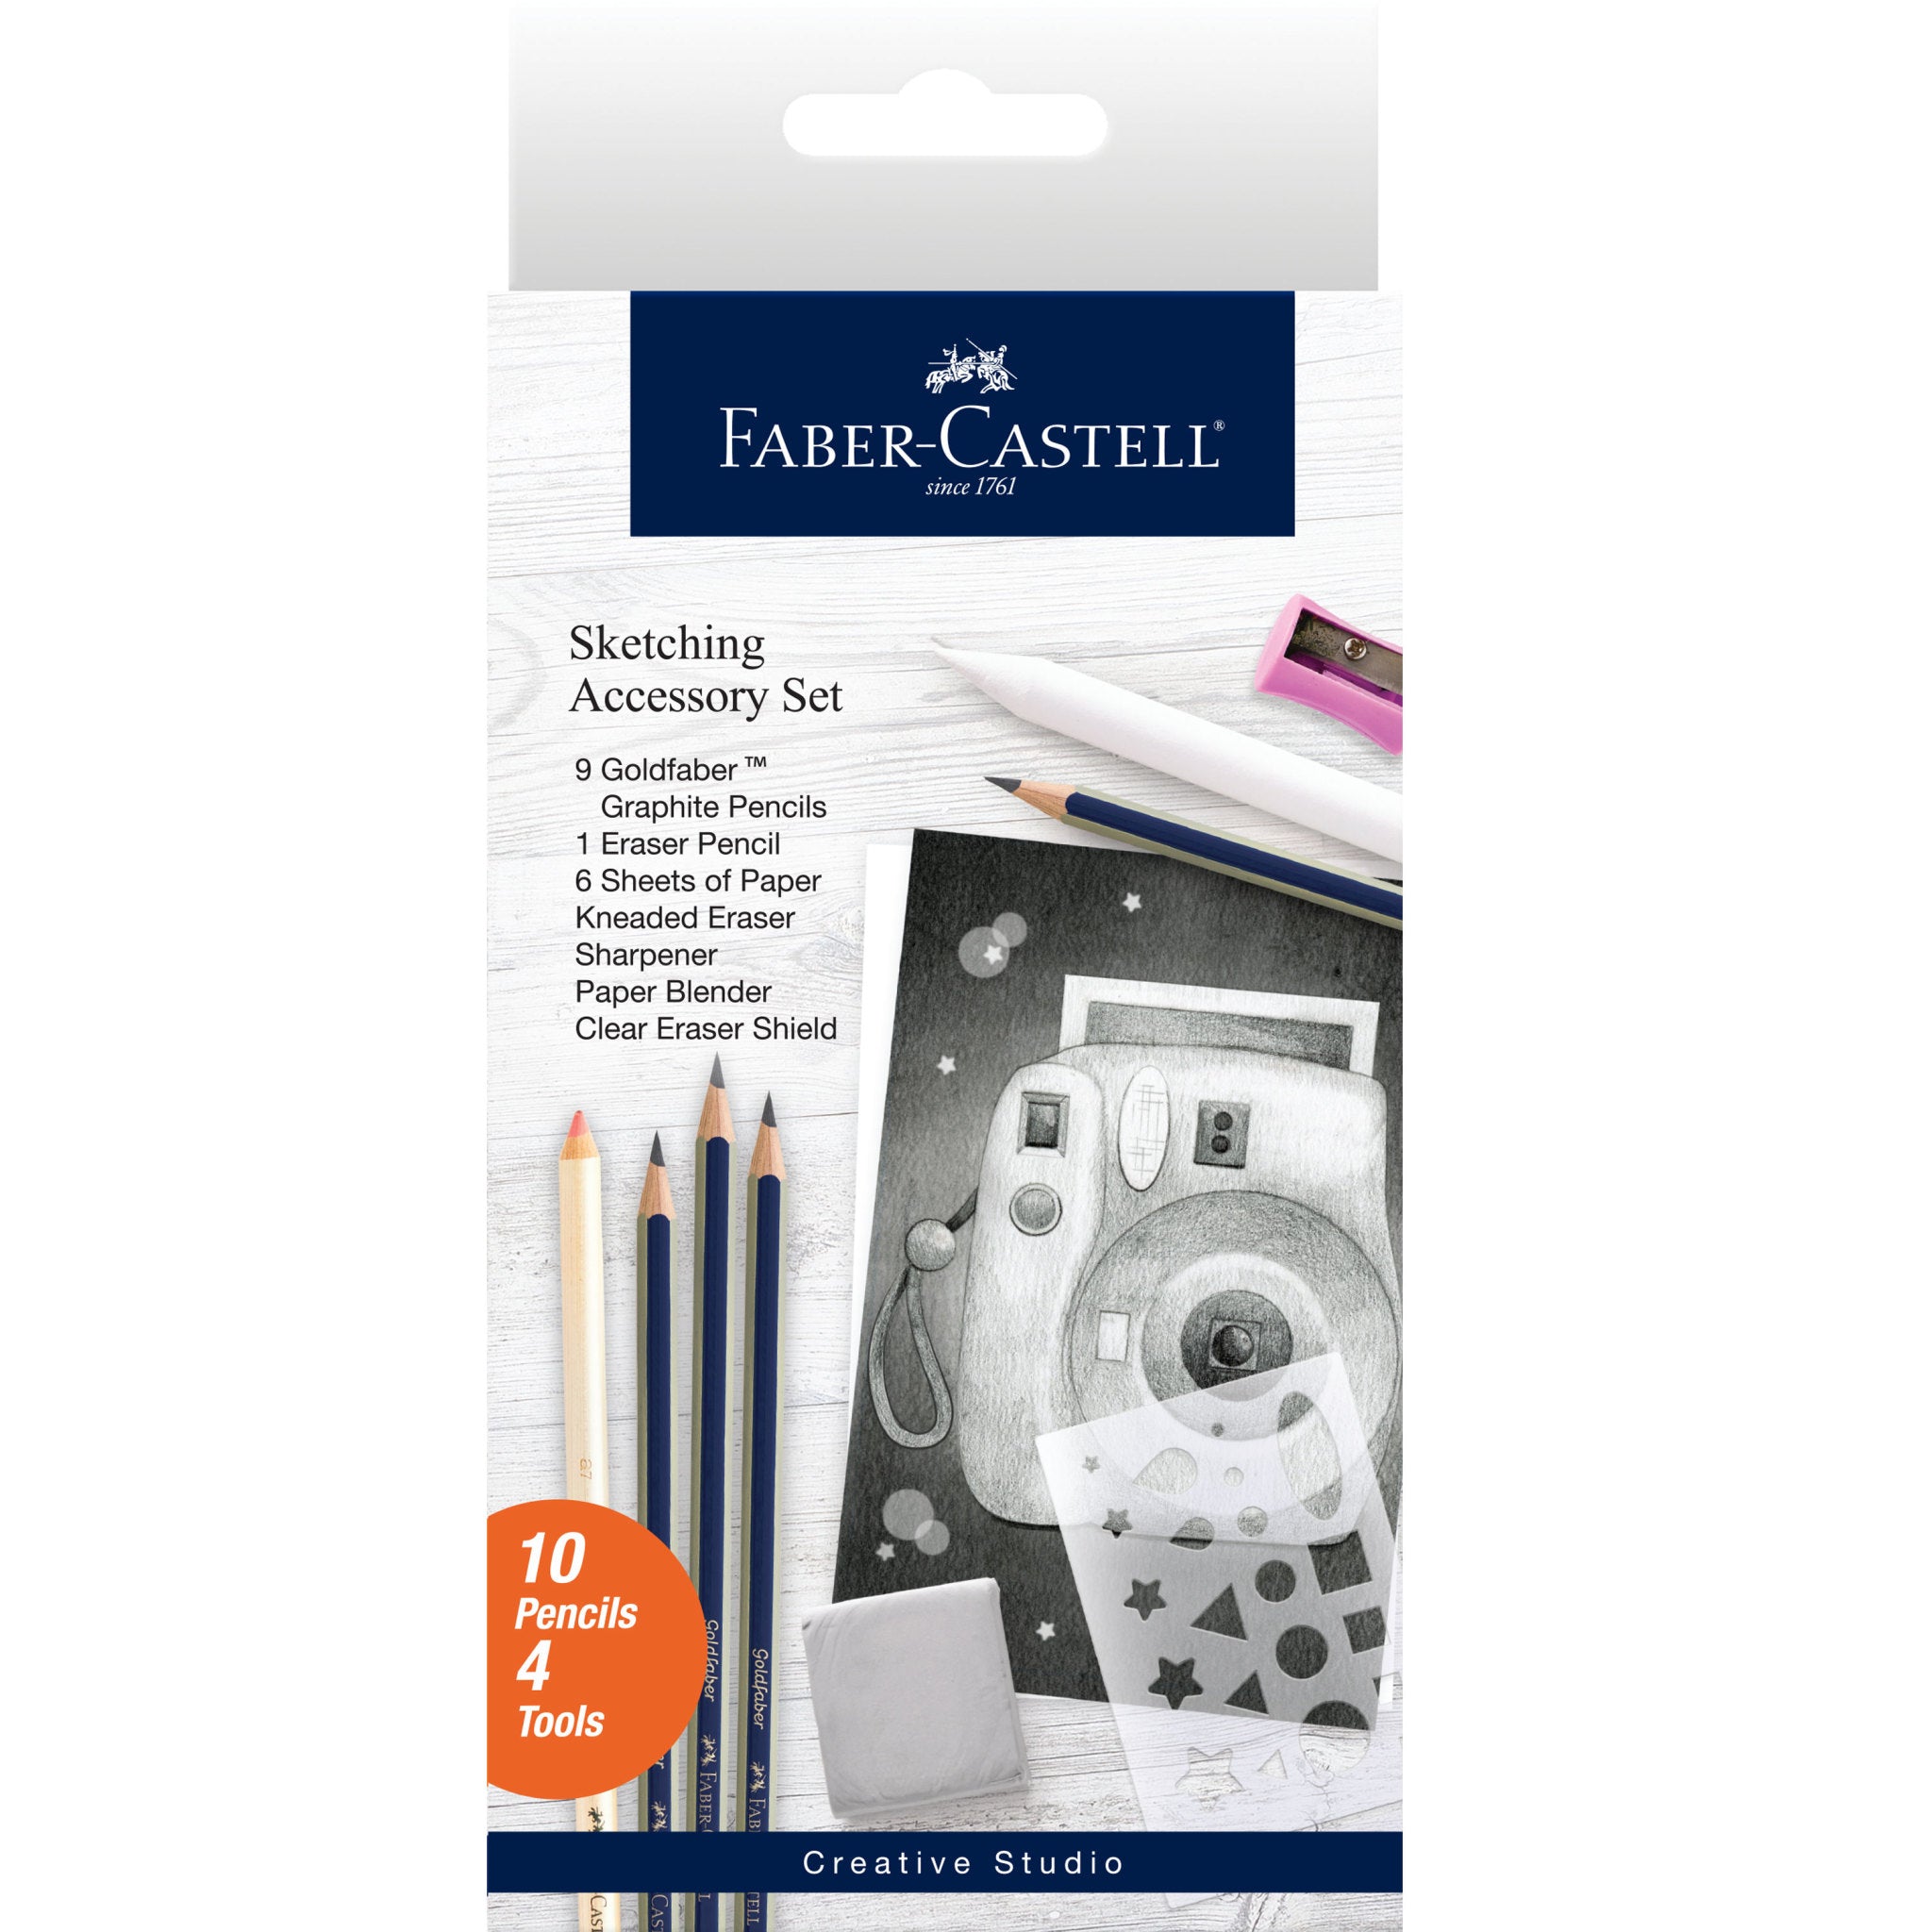 Pitt Graphite Matte Tin of 8 Pencils and Accessories – Faber-Castell USA